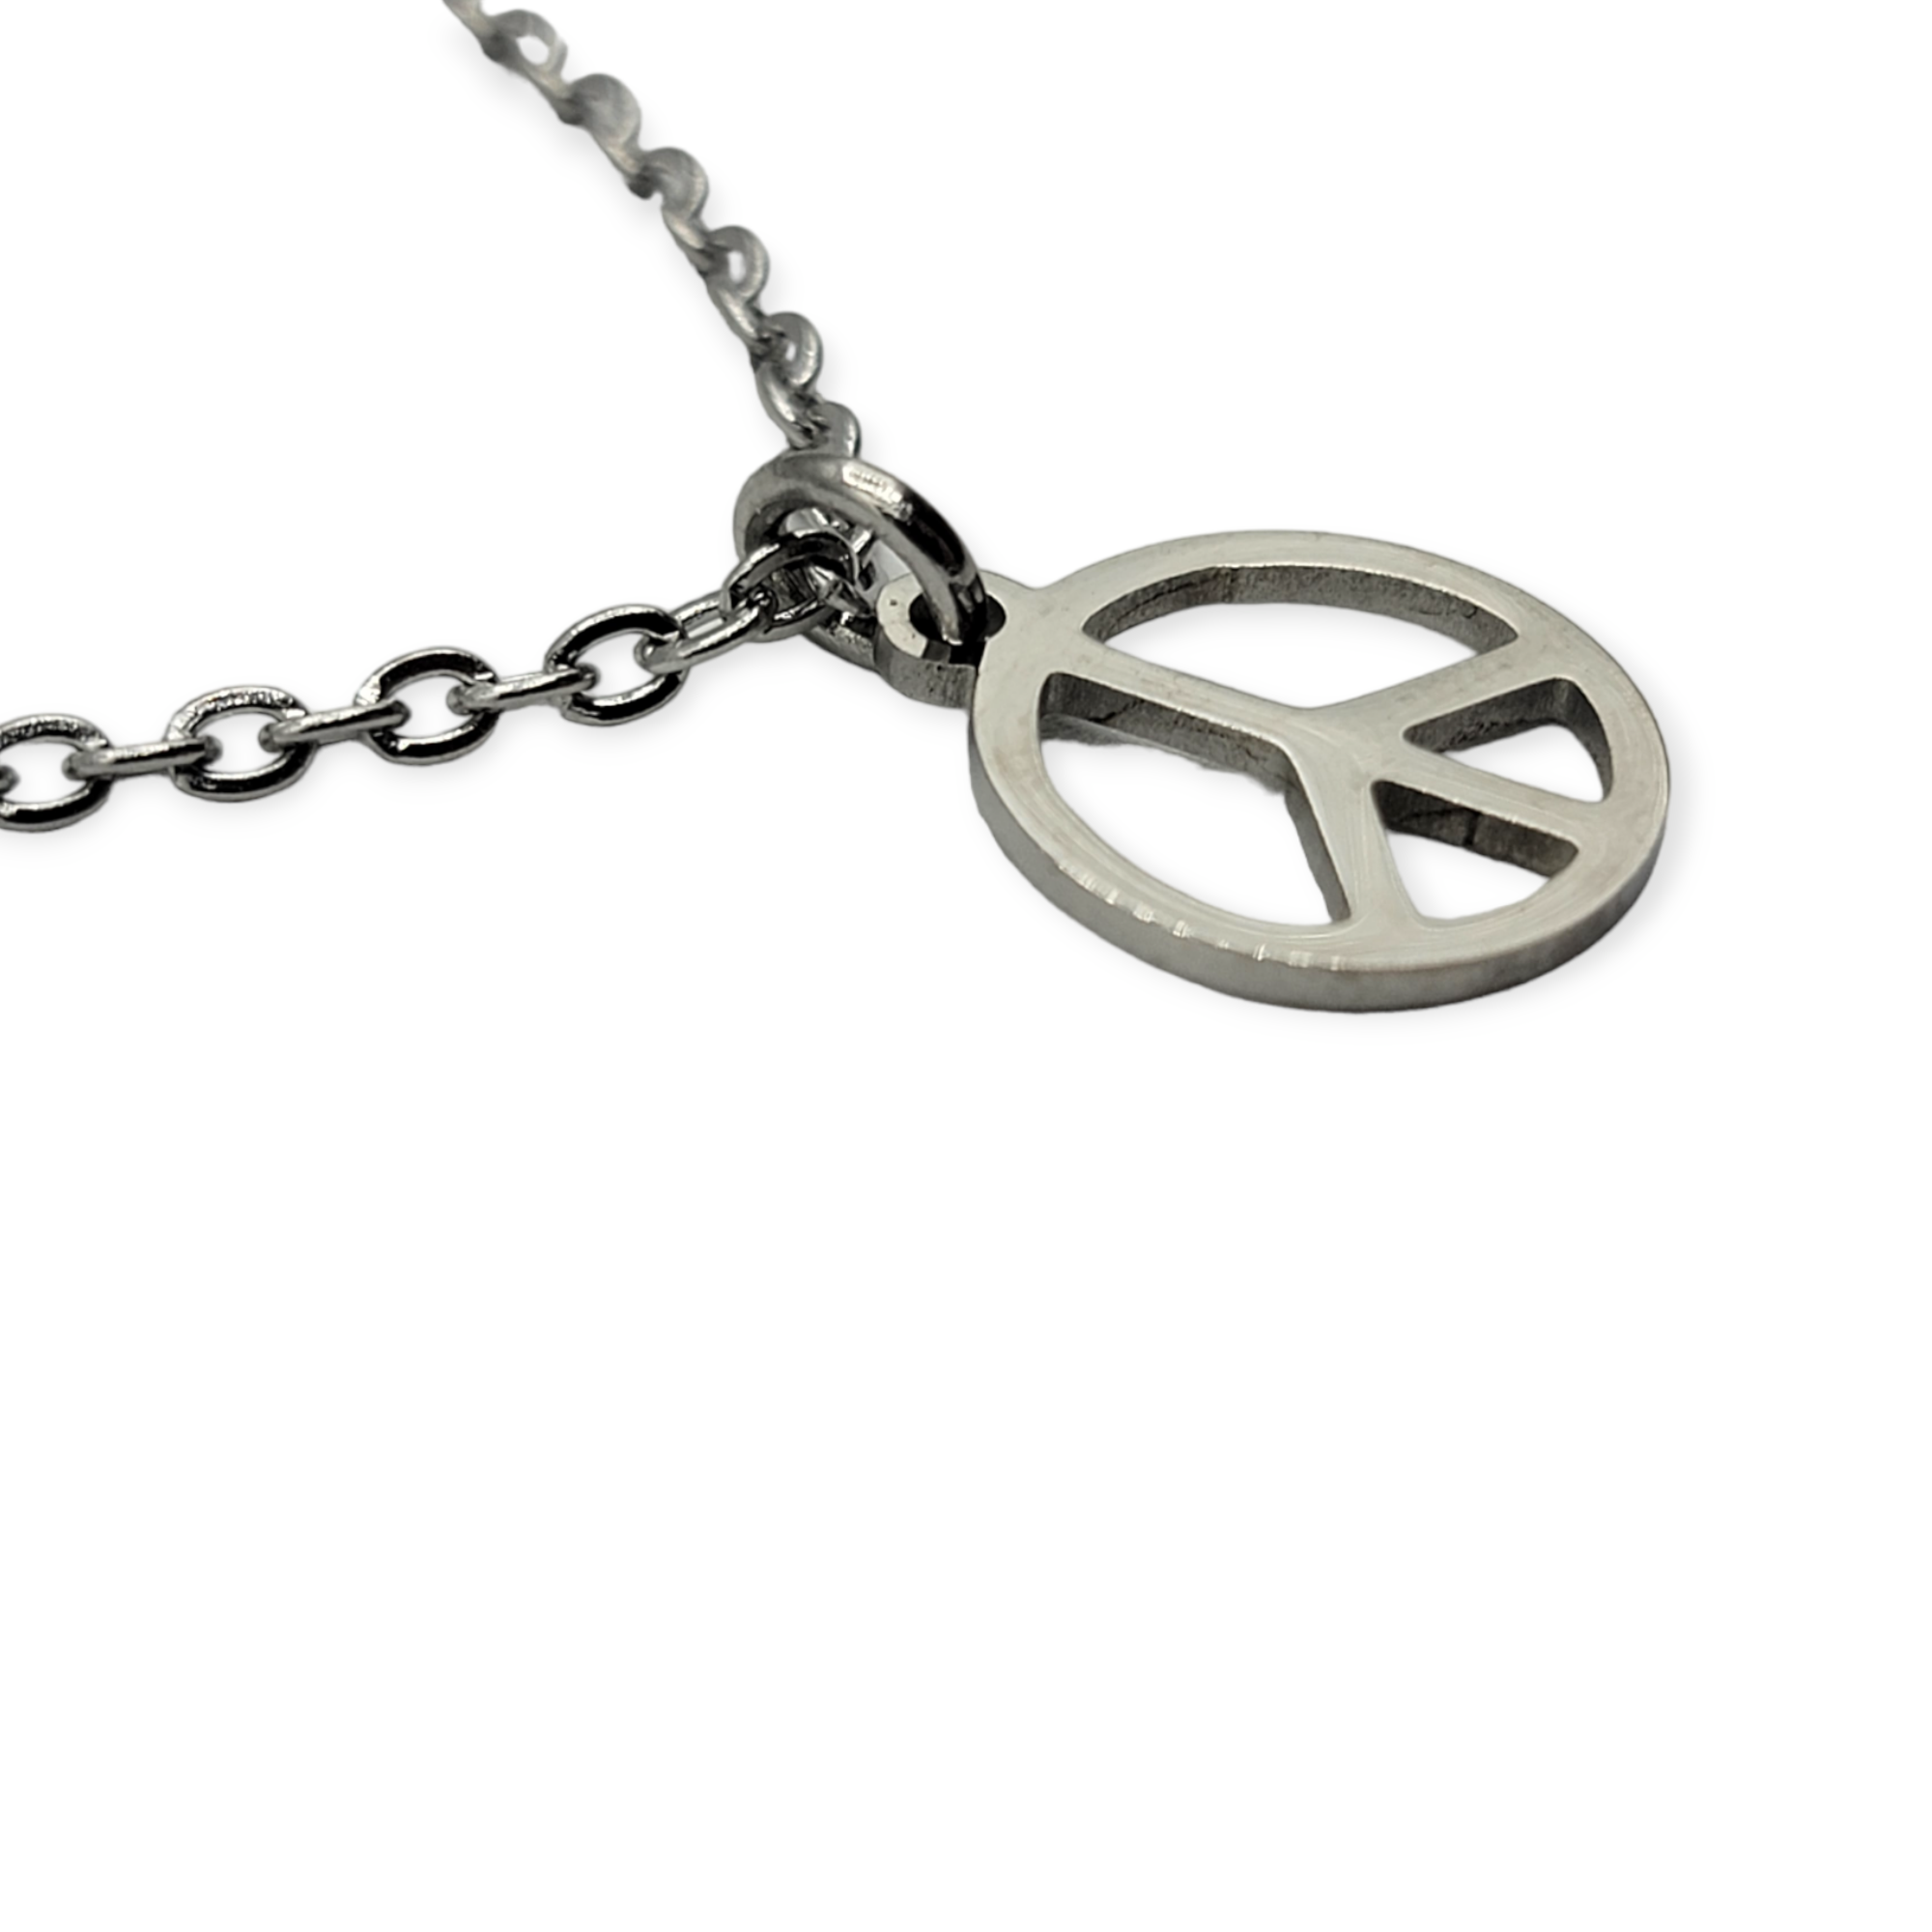 Peace sign necklace -"Peace, Love, Happy" message - Travelers Trade Post